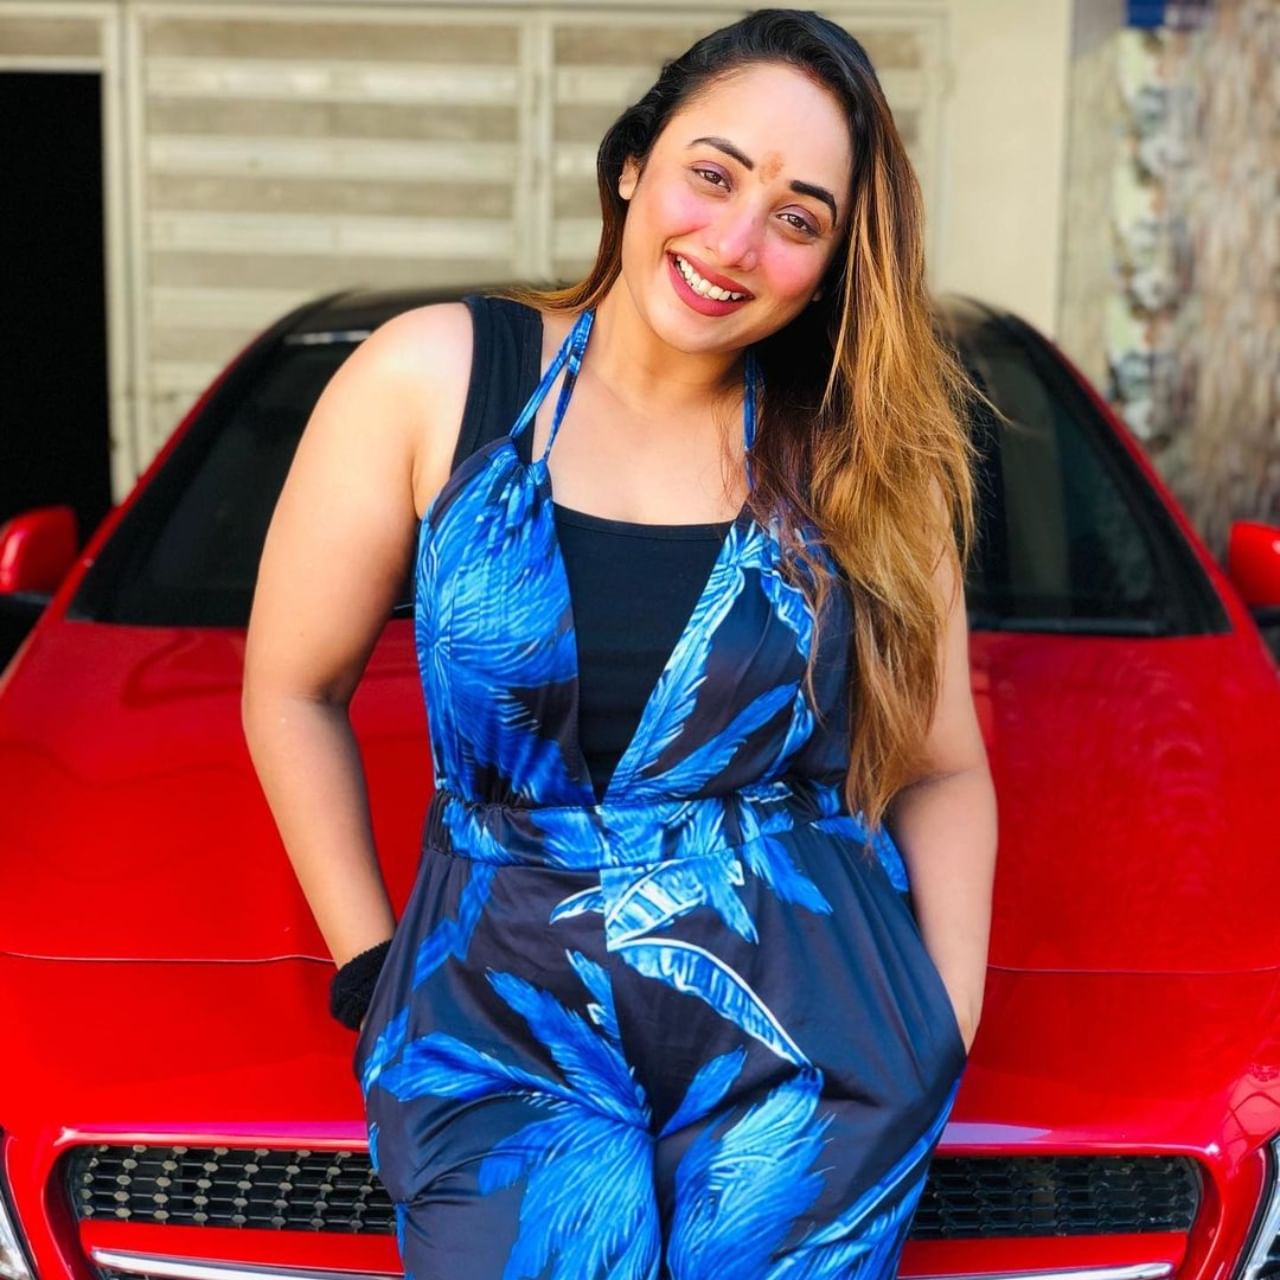 Any outfit of actress Rani Chatterjee cannot be taken lightly.  She is loved in every outfit.  Whether it is a desi look or a western look, Rani Chatterjee's style always wins the hearts of her fans.  (Photo credit- @ranichatterjeeofficial)